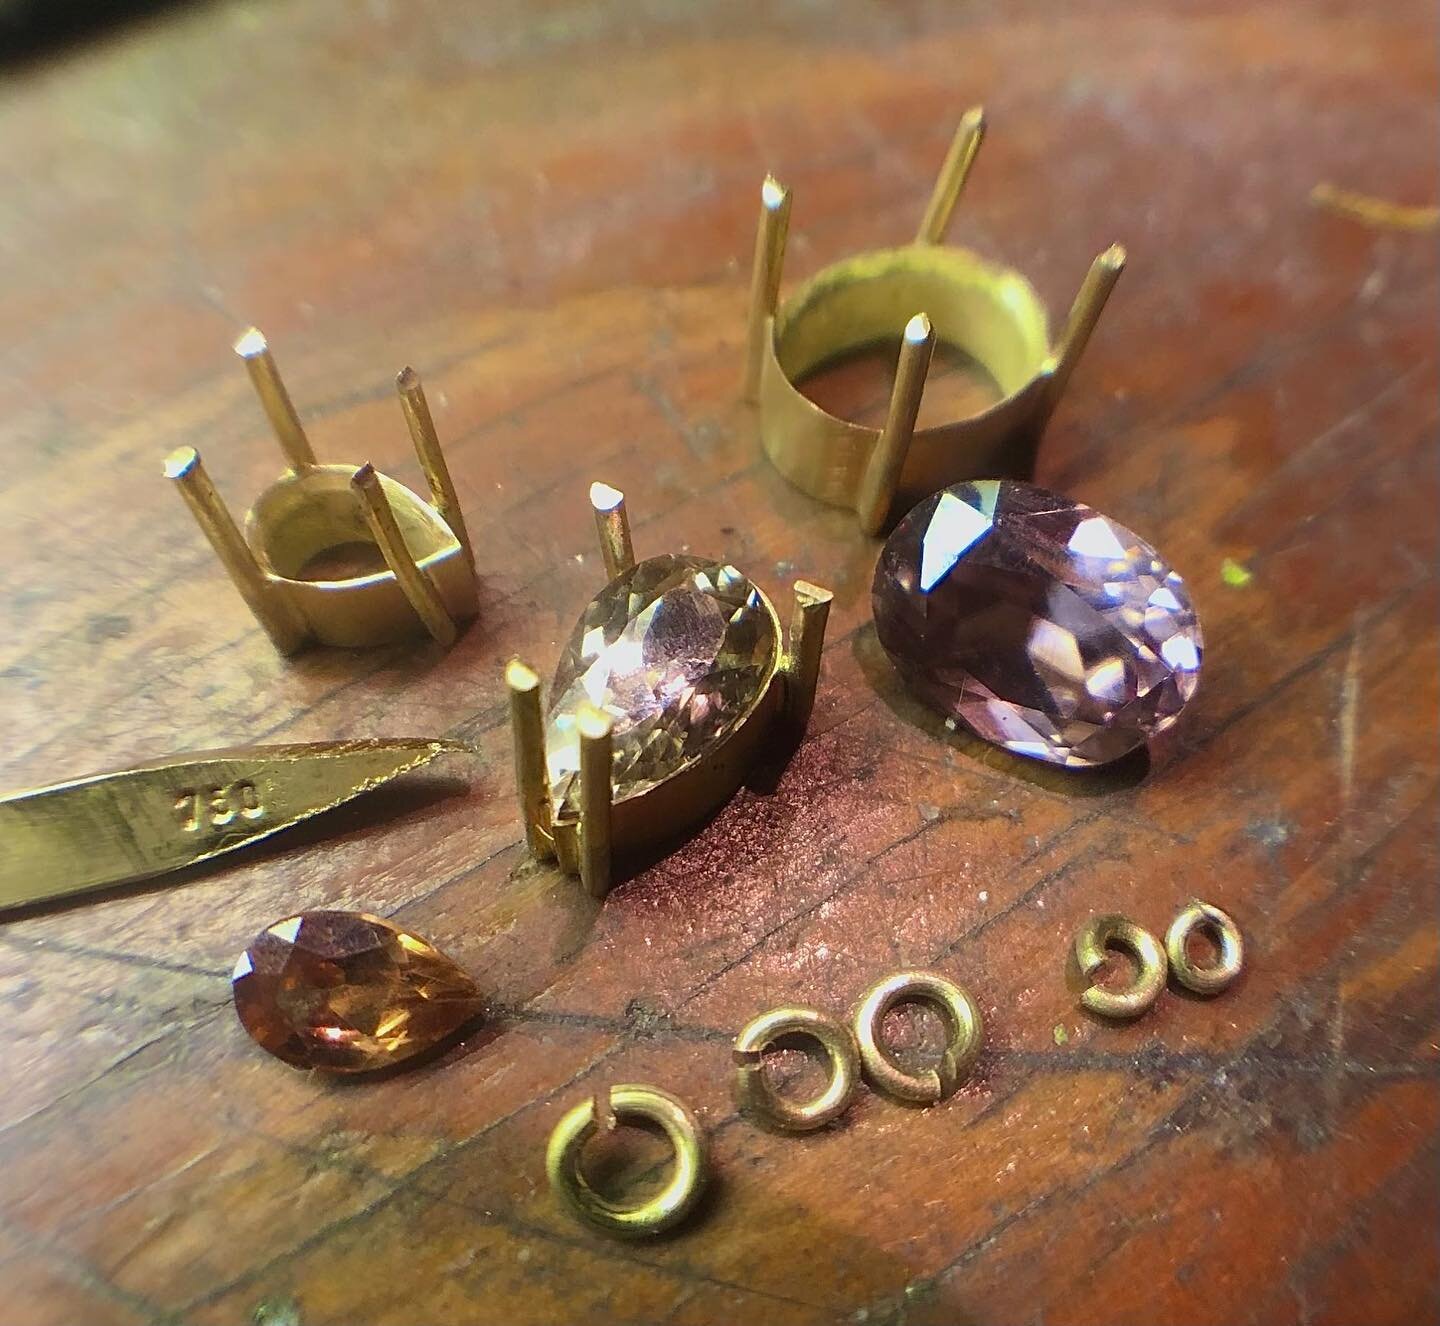 Golden claws at the bench, almost ready for setting.

Please get in touch if you would like to discuss a custom piece. 

#markscownjewellery #pendants #finejewellery #handmadejewellery #handmade #jewellerydesigner #gold #citrine #amethsyt #custommade